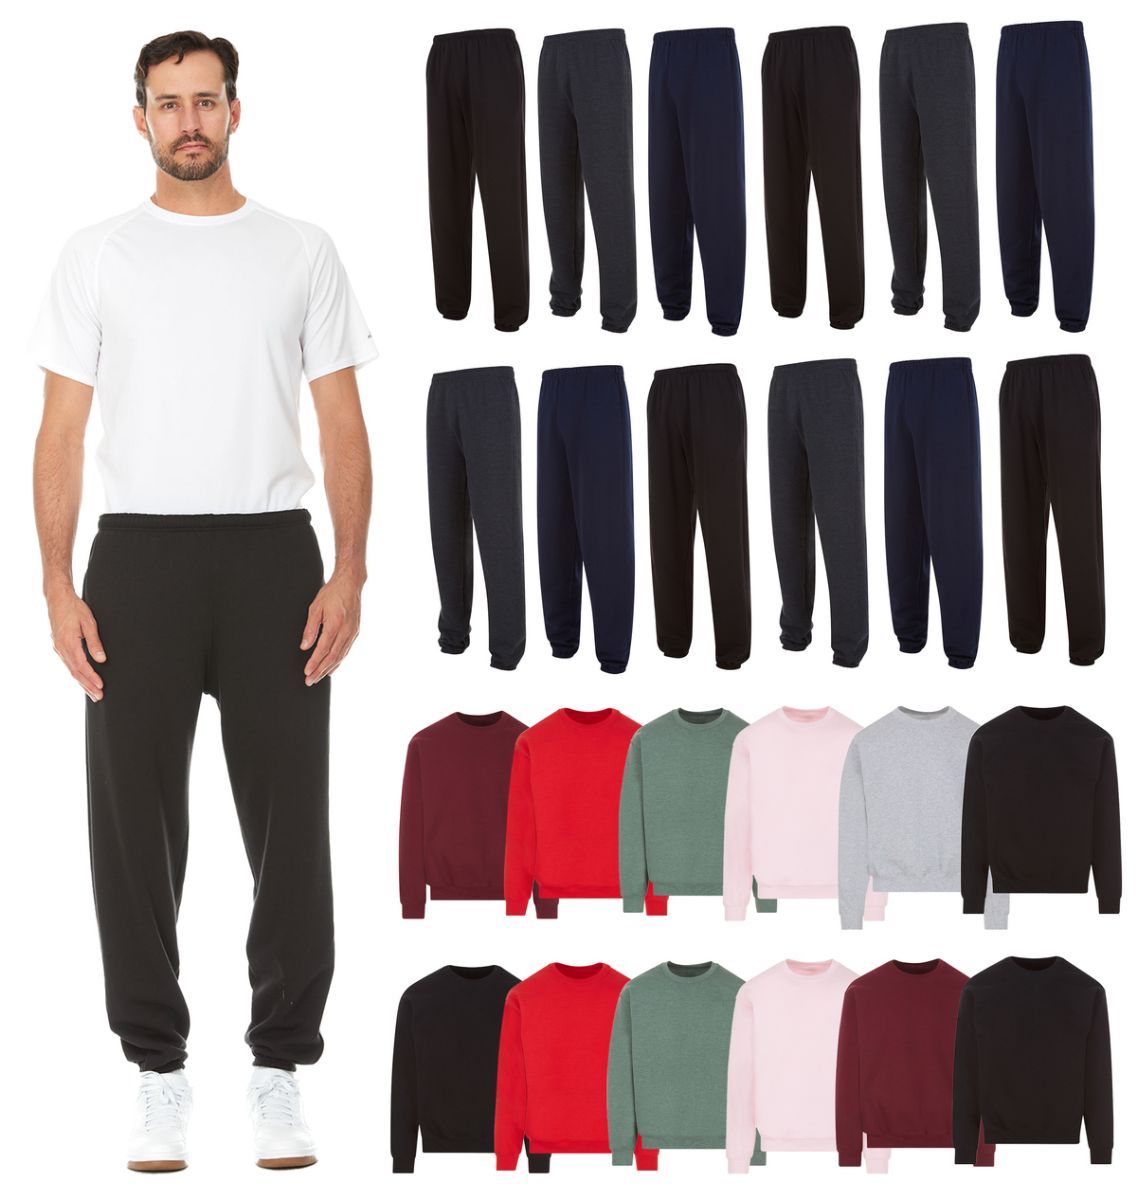 24 Pieces of Mix And Match Mens Fleece Jogger Pants And Crew Neck Sweatshirts Assorted Colors Size Xlarge